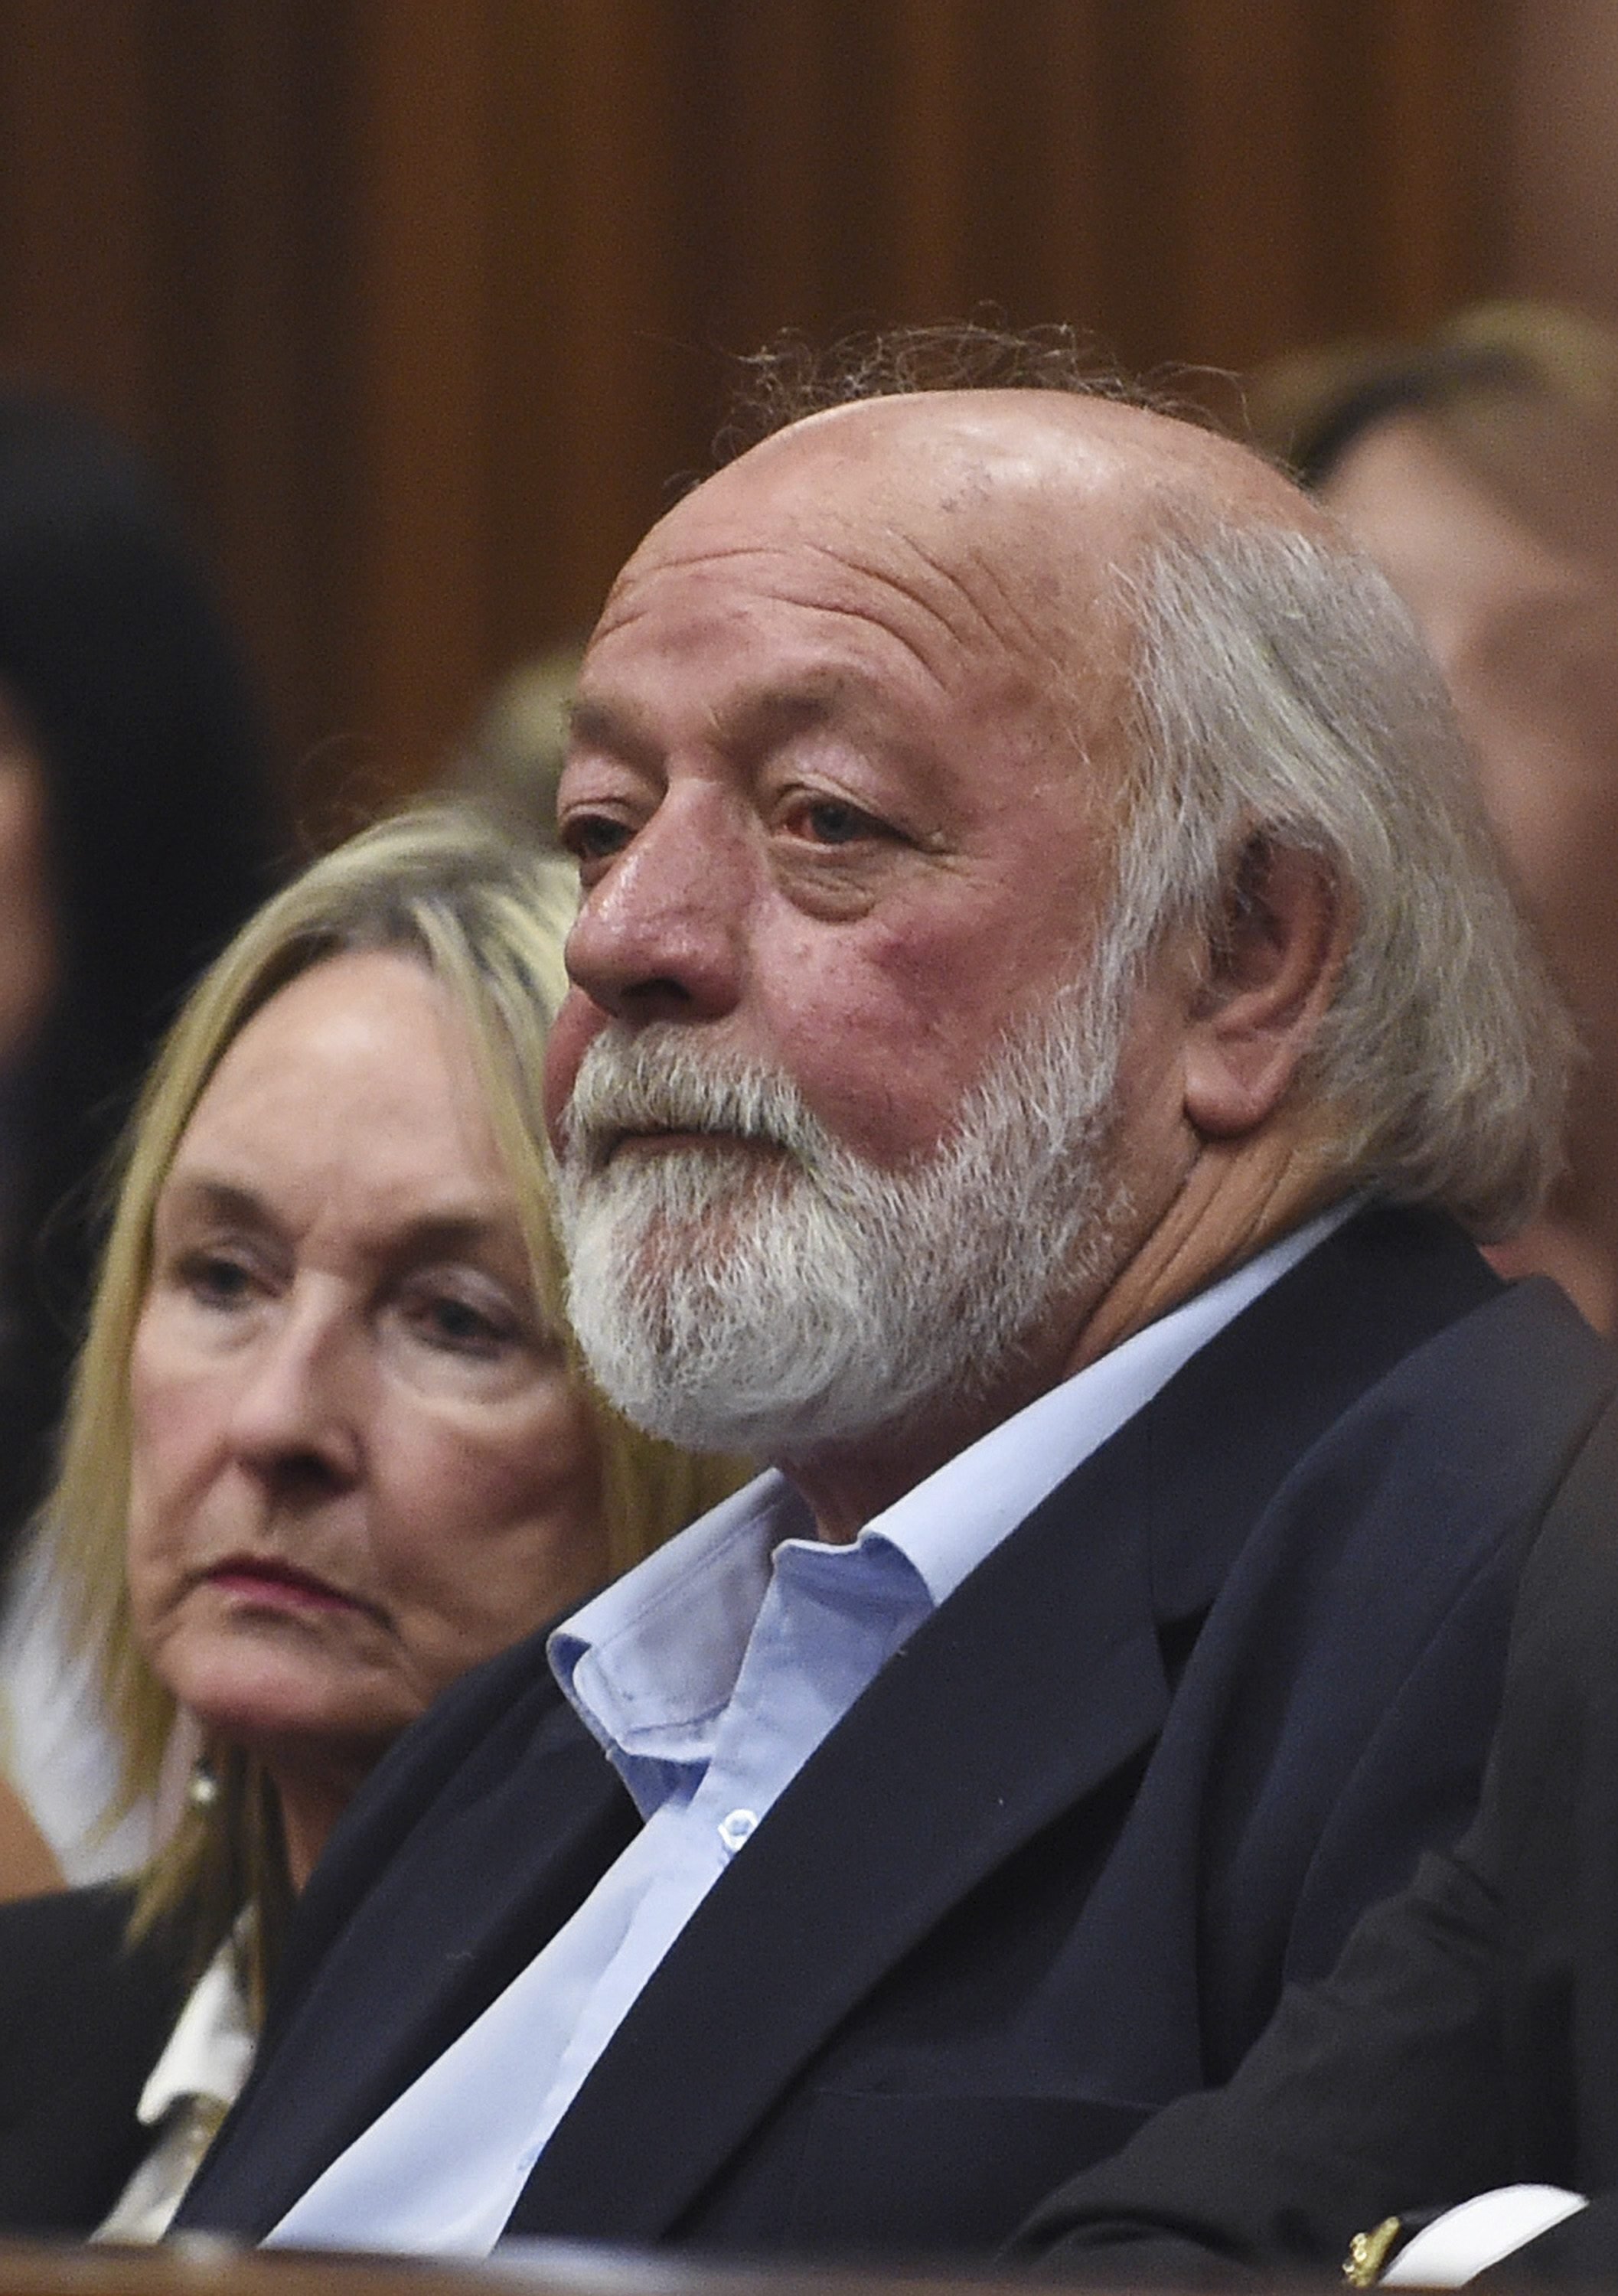 June and Barry Steenkamp, parents of Reeva Steenkamp listen to the judgement of Olympic and Paralympic track star Oscar Pistorius at the North Gauteng High Court in Pretoria